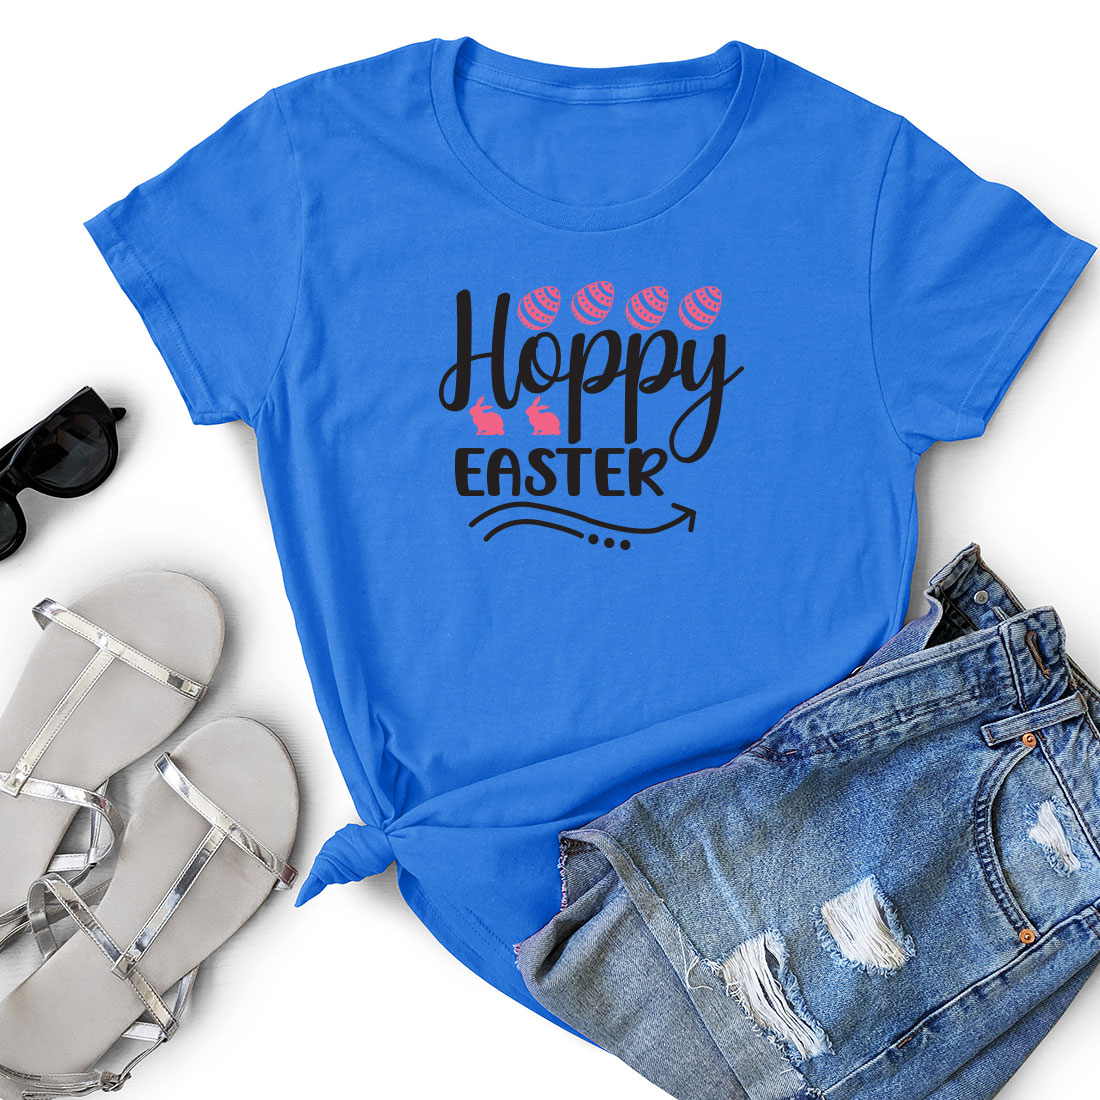 T - shirt that says happy easter next to a pair of shorts.